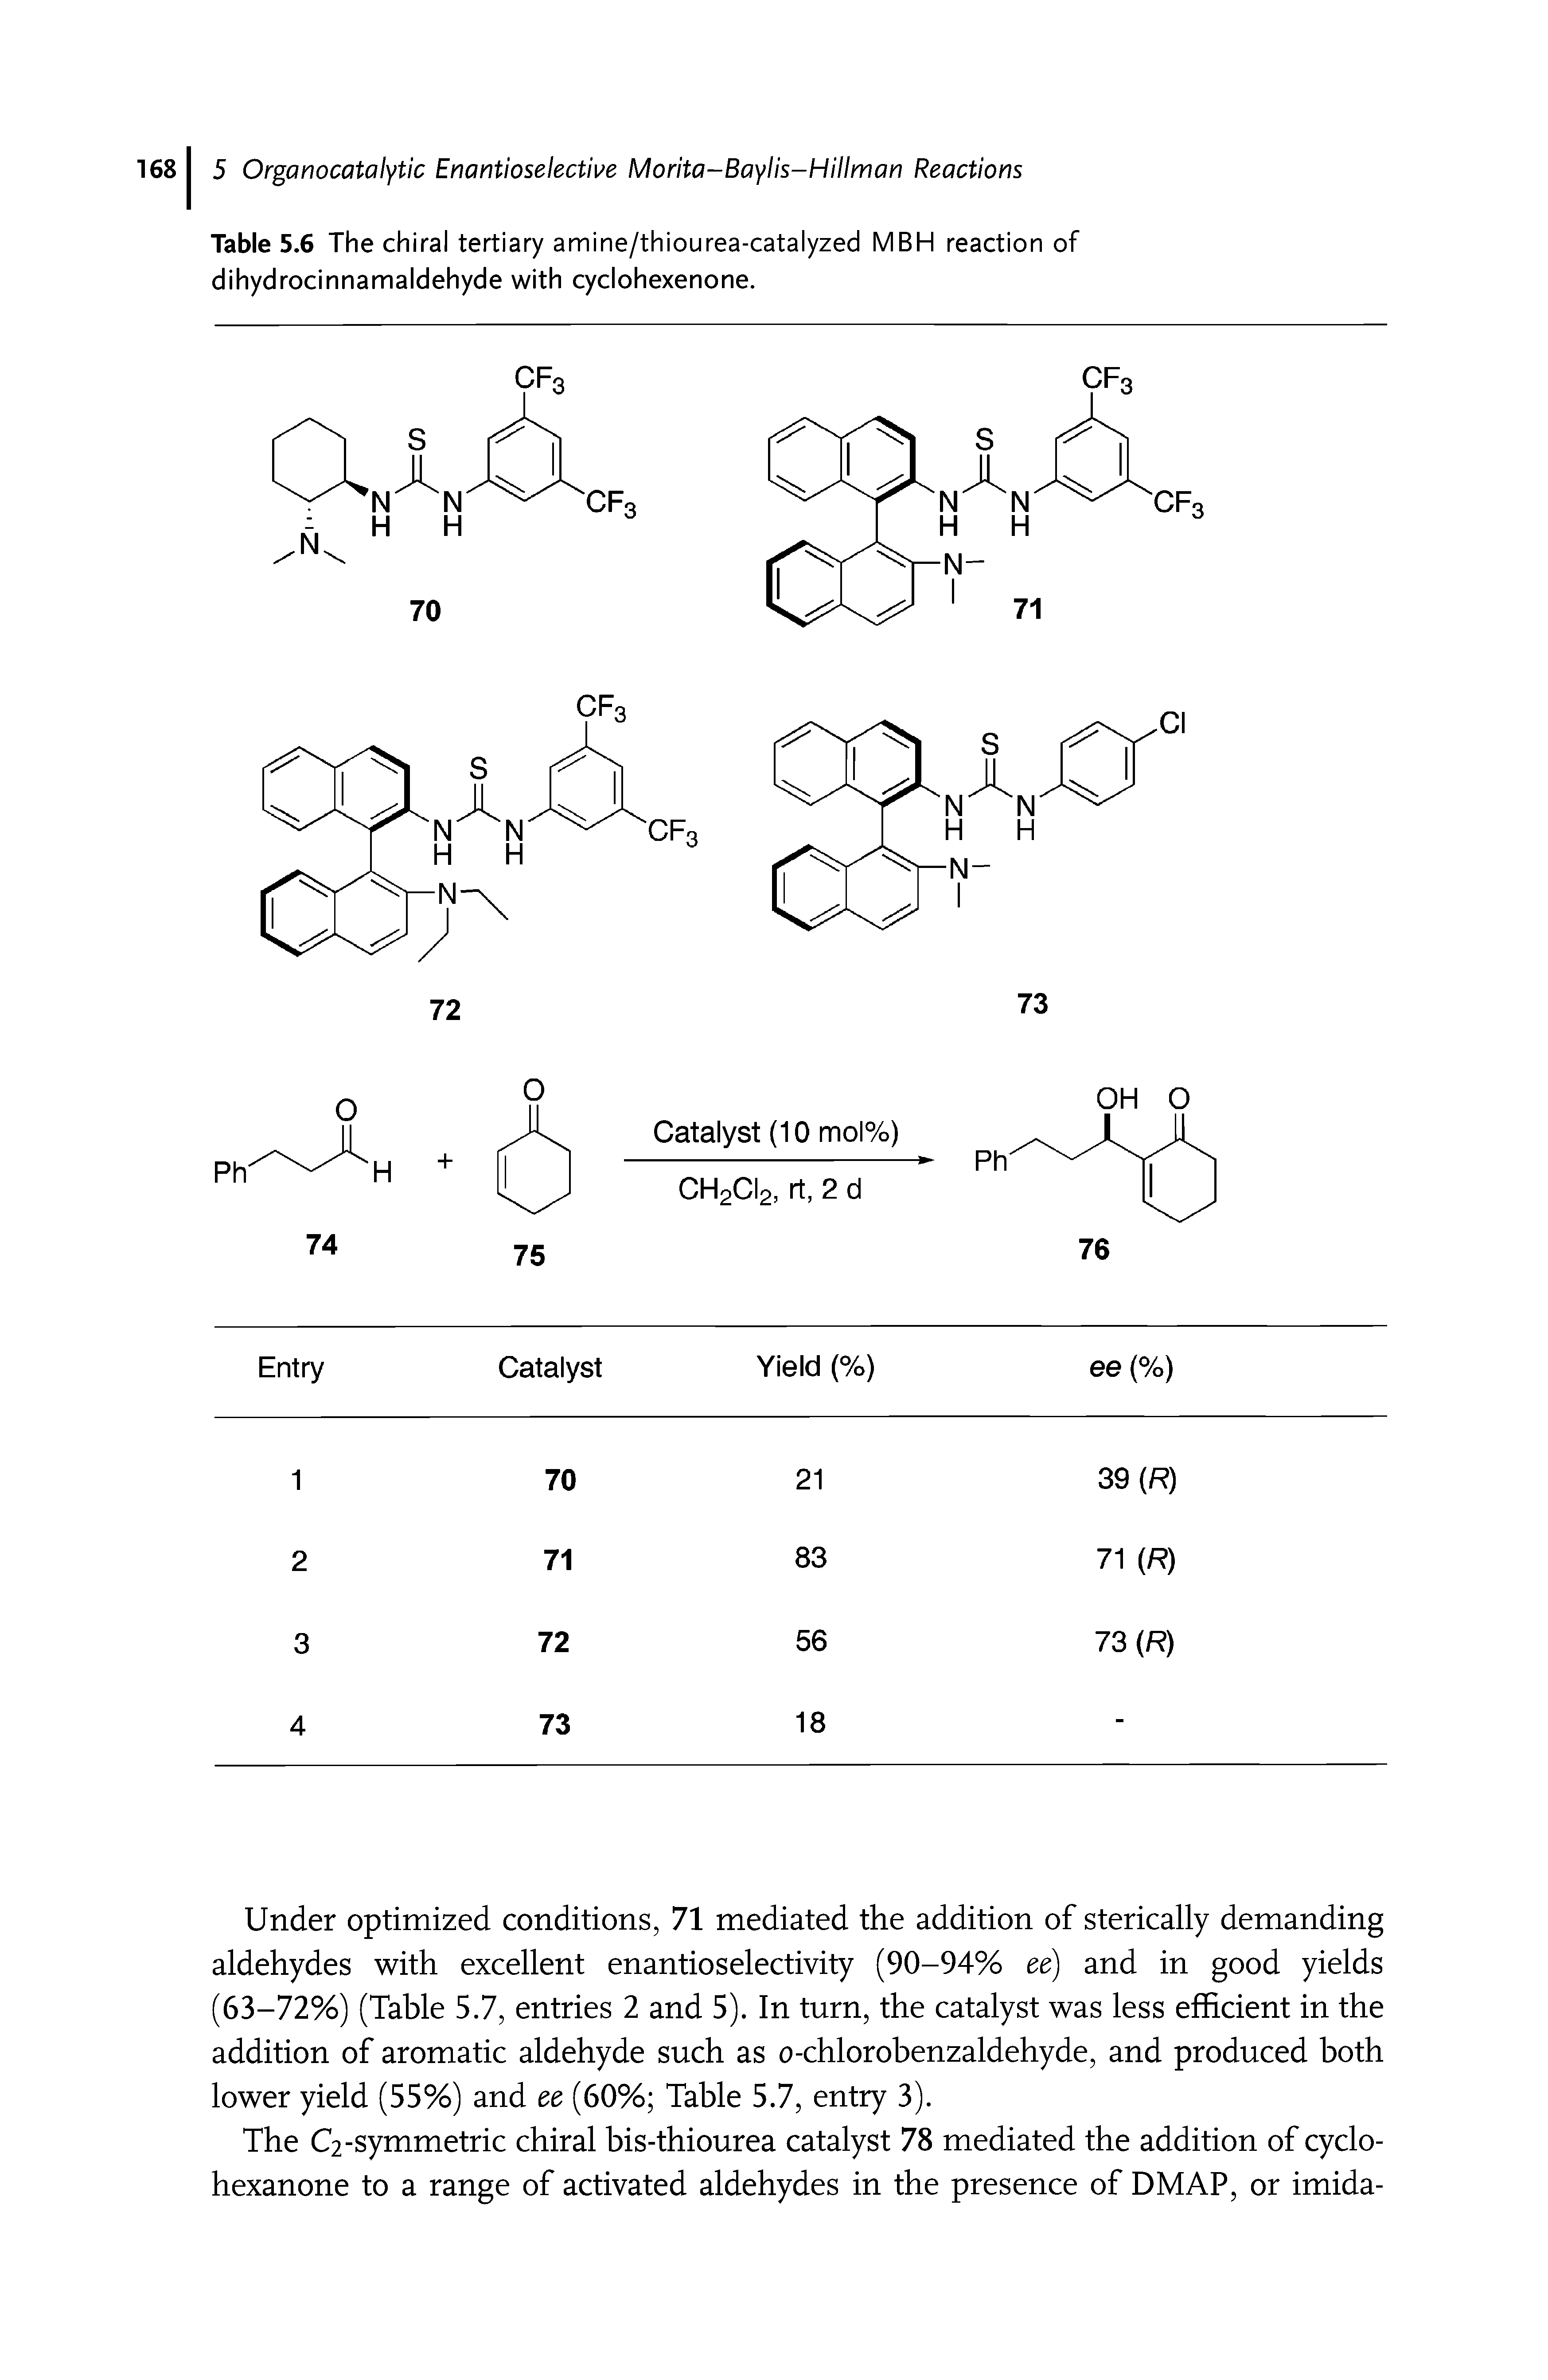 Table 5.6 The chiral tertiary amine/thiourea-catalyzed MBH reaction of dihydrocinnamaldehyde with cyclohexenone.